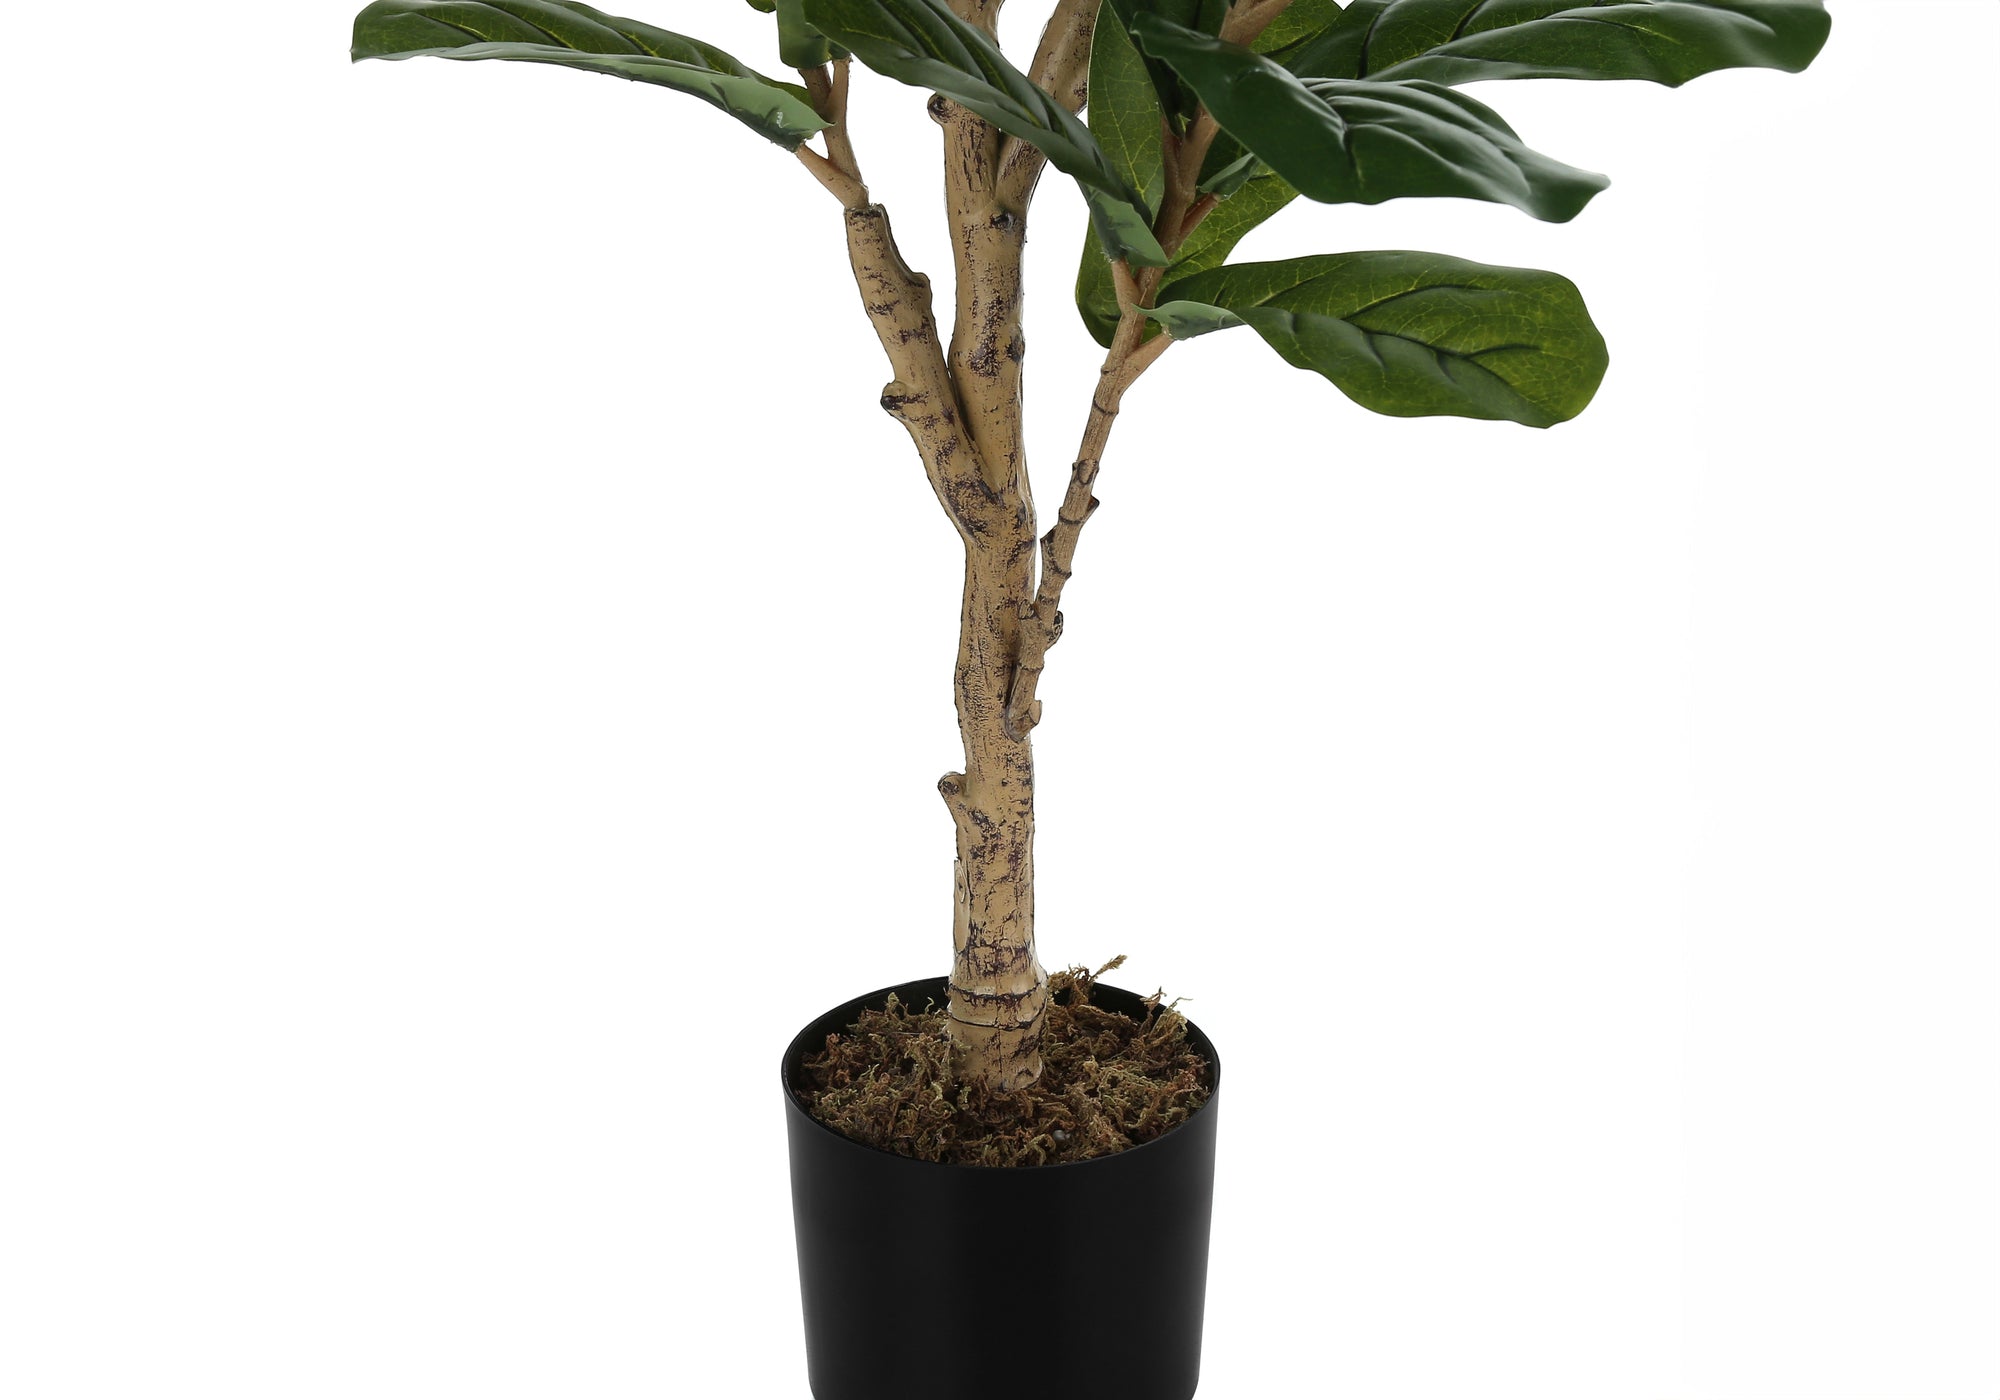 MN-479541    Artificial Plant, 47" Tall, Fiddle Tree, Indoor, Faux, Fake, Floor, Greenery, Potted, Real Touch, Decorative, Green Leaves, Black Pot